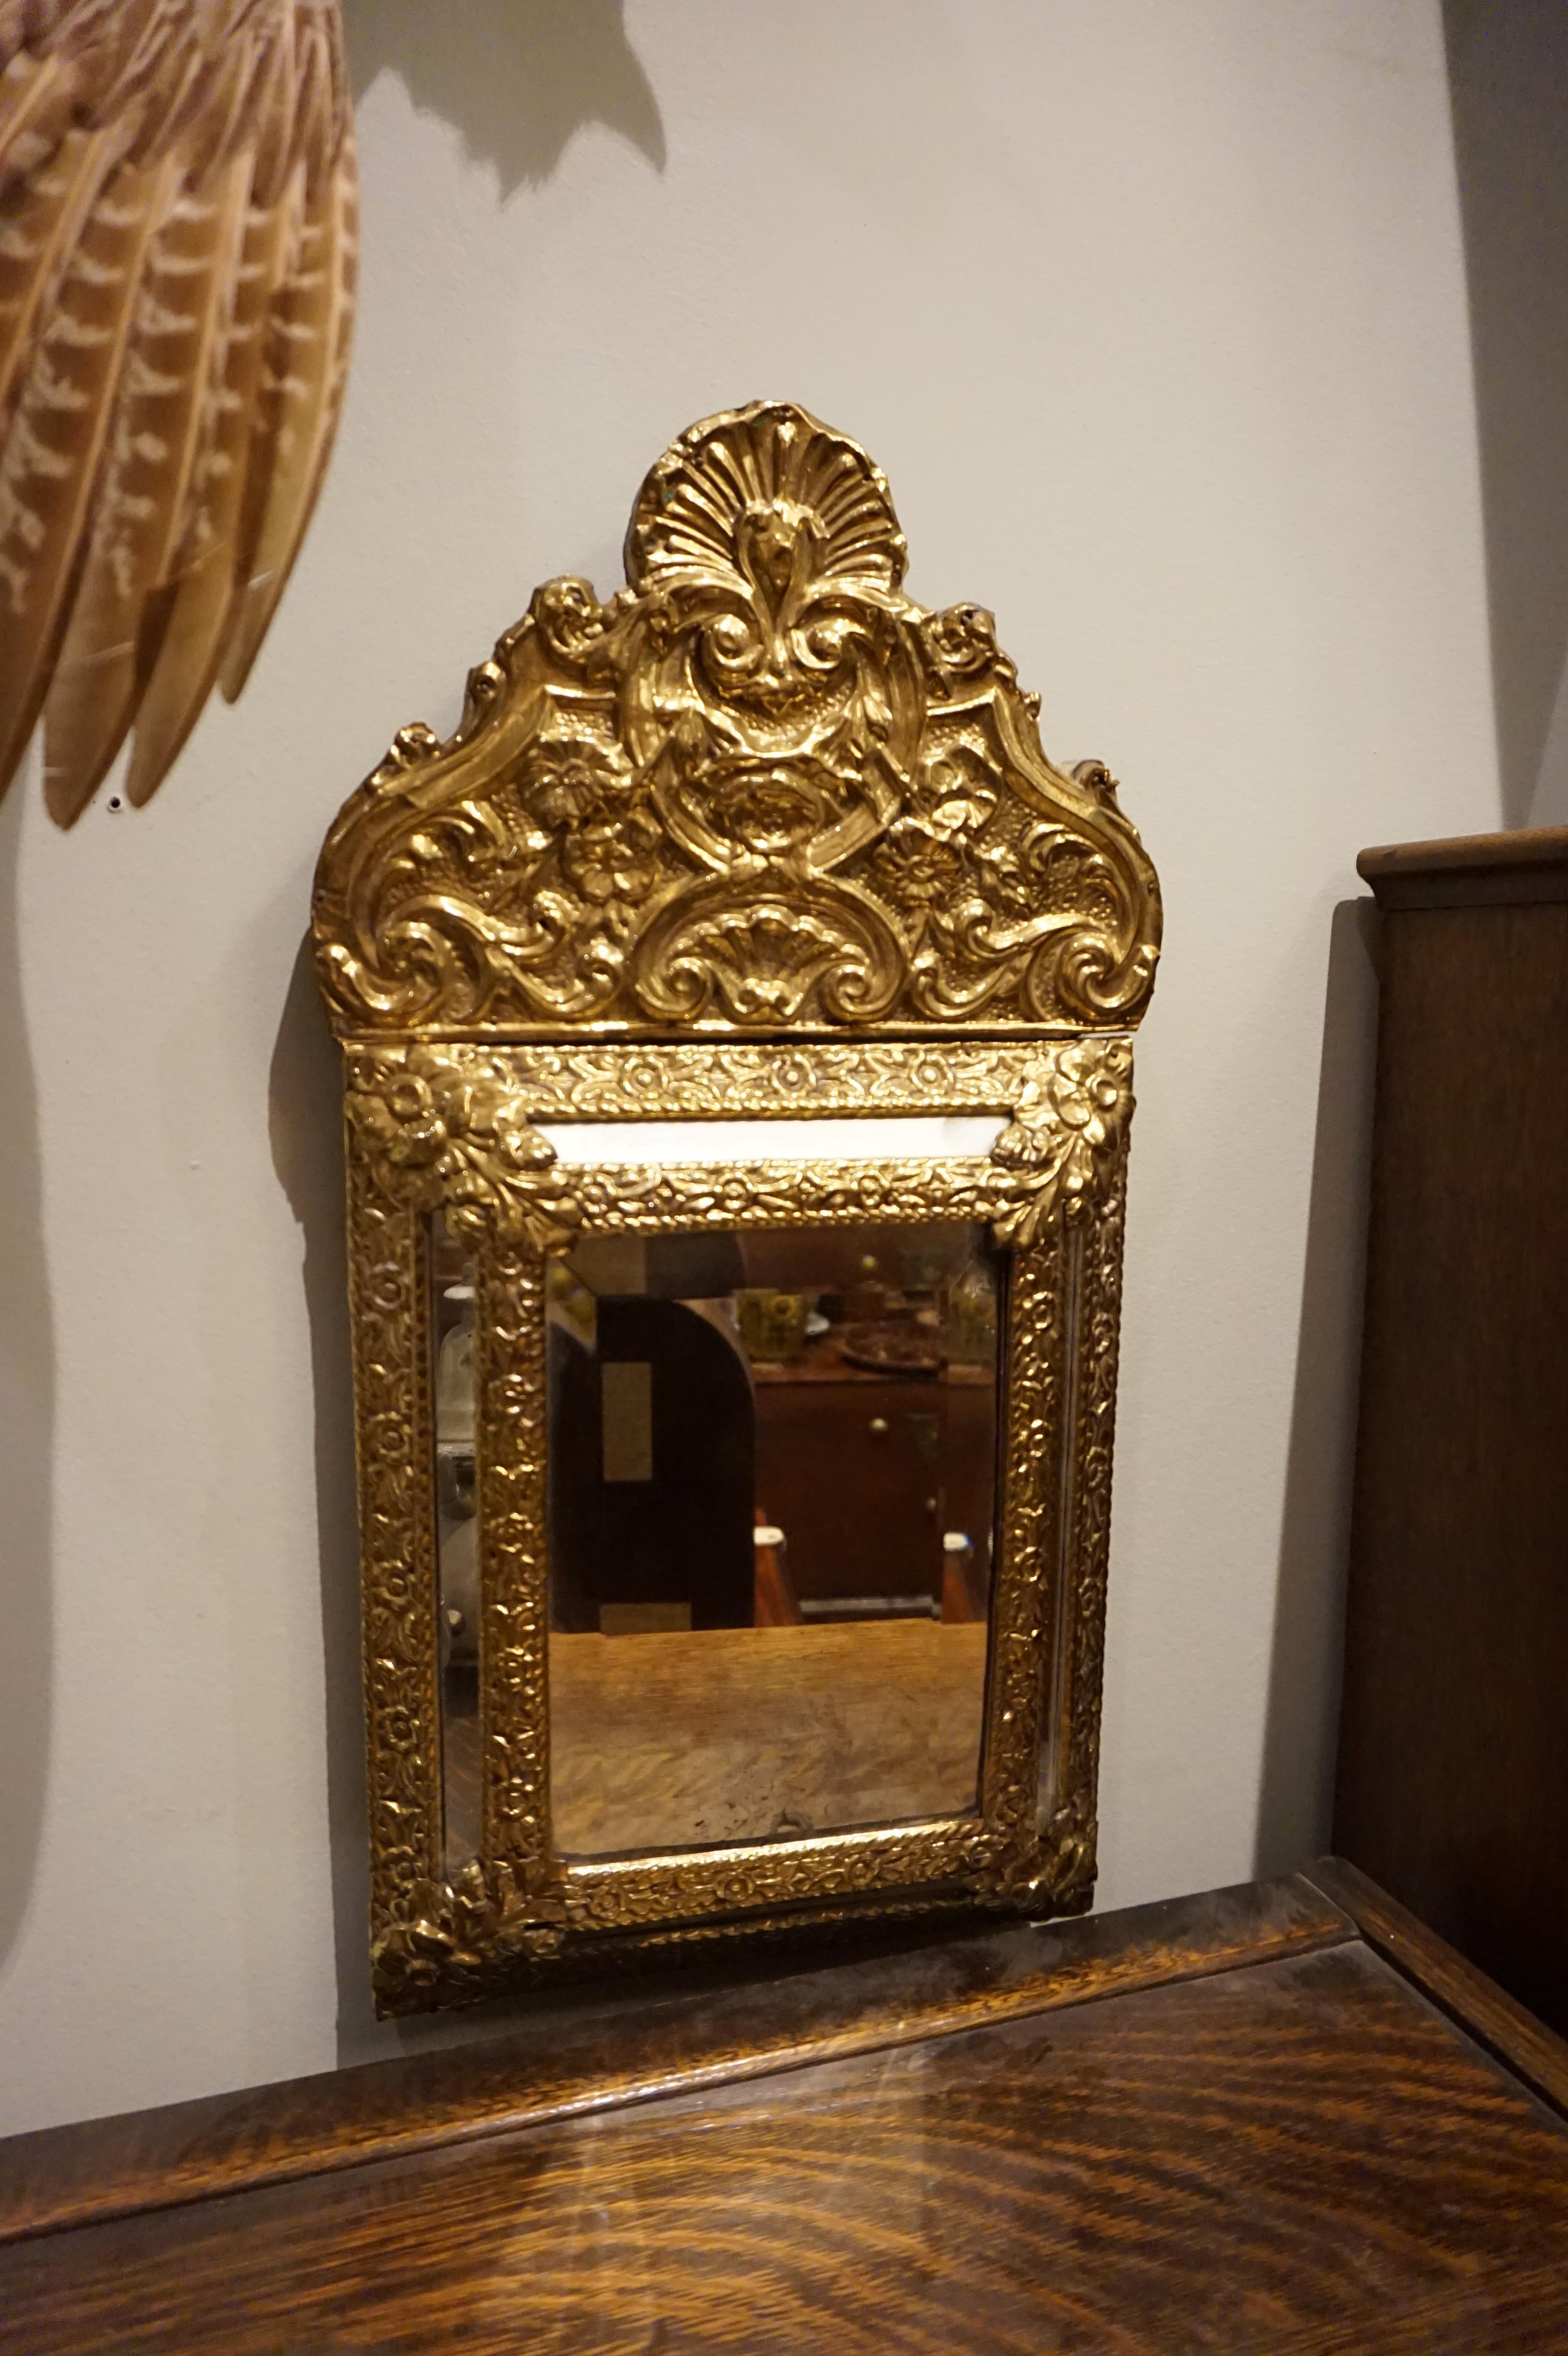 Brass work in good condition. Excellent detail with lead backed bevel glass showing originality.